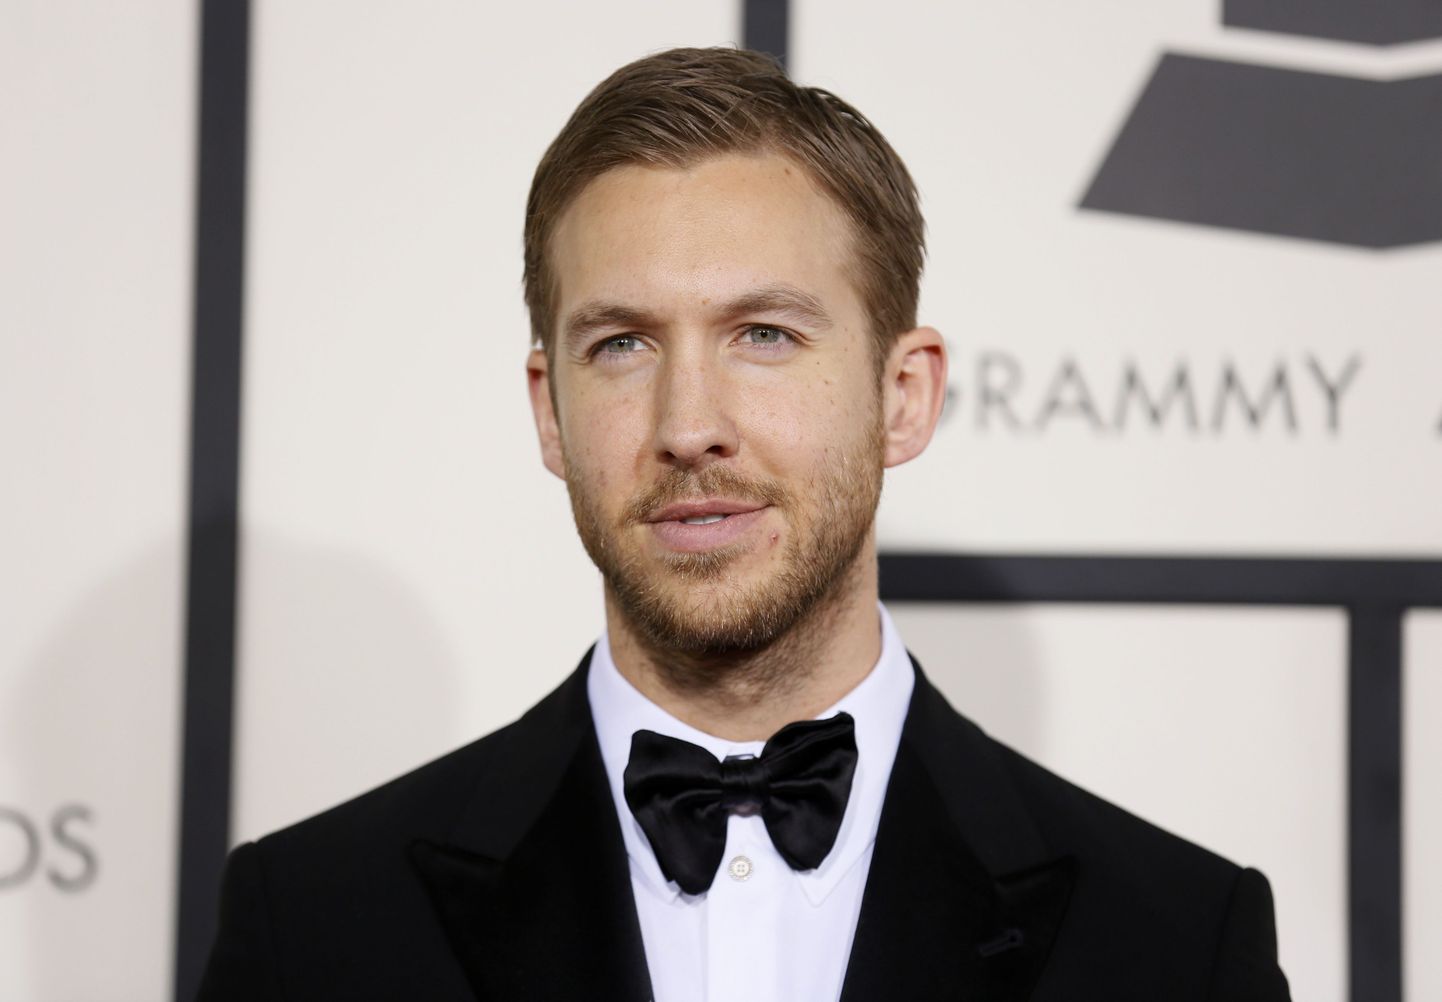 Singer Calvin Harris arrives at the 56th annual Grammy Awards in Los Angeles, California January 26, 2014.     REUTERS/Danny Moloshok (UNITED STATES TAGS: ENTERTAINMENT) (GRAMMYS-ARRIVALS)